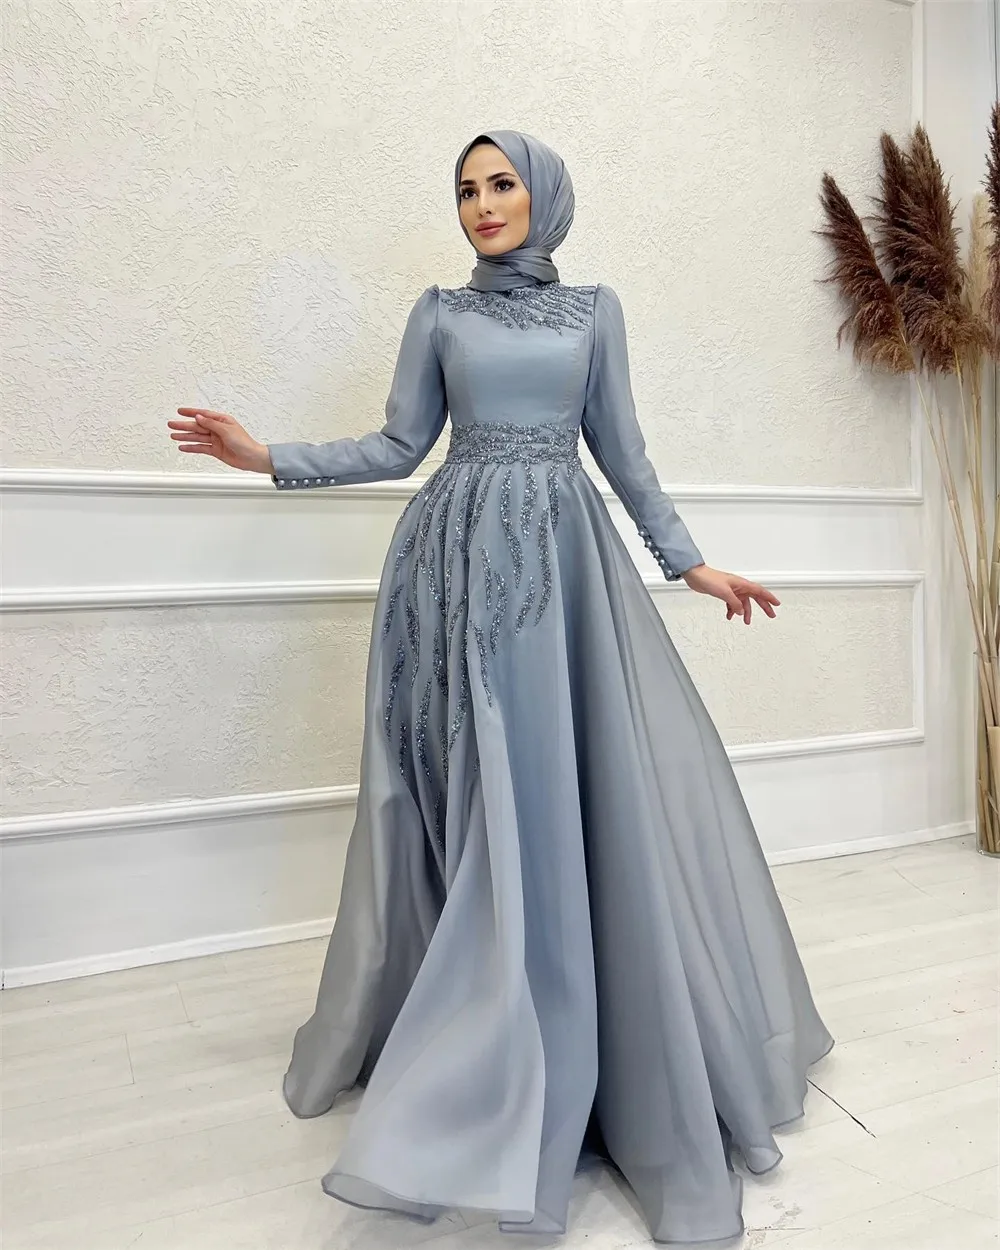 

Long Sleeves Muslim Evening Dresses For Women Party Gowns Formal Prom Dress A Line O Neck Beaded Dubai Arabic فساتين الحفلات